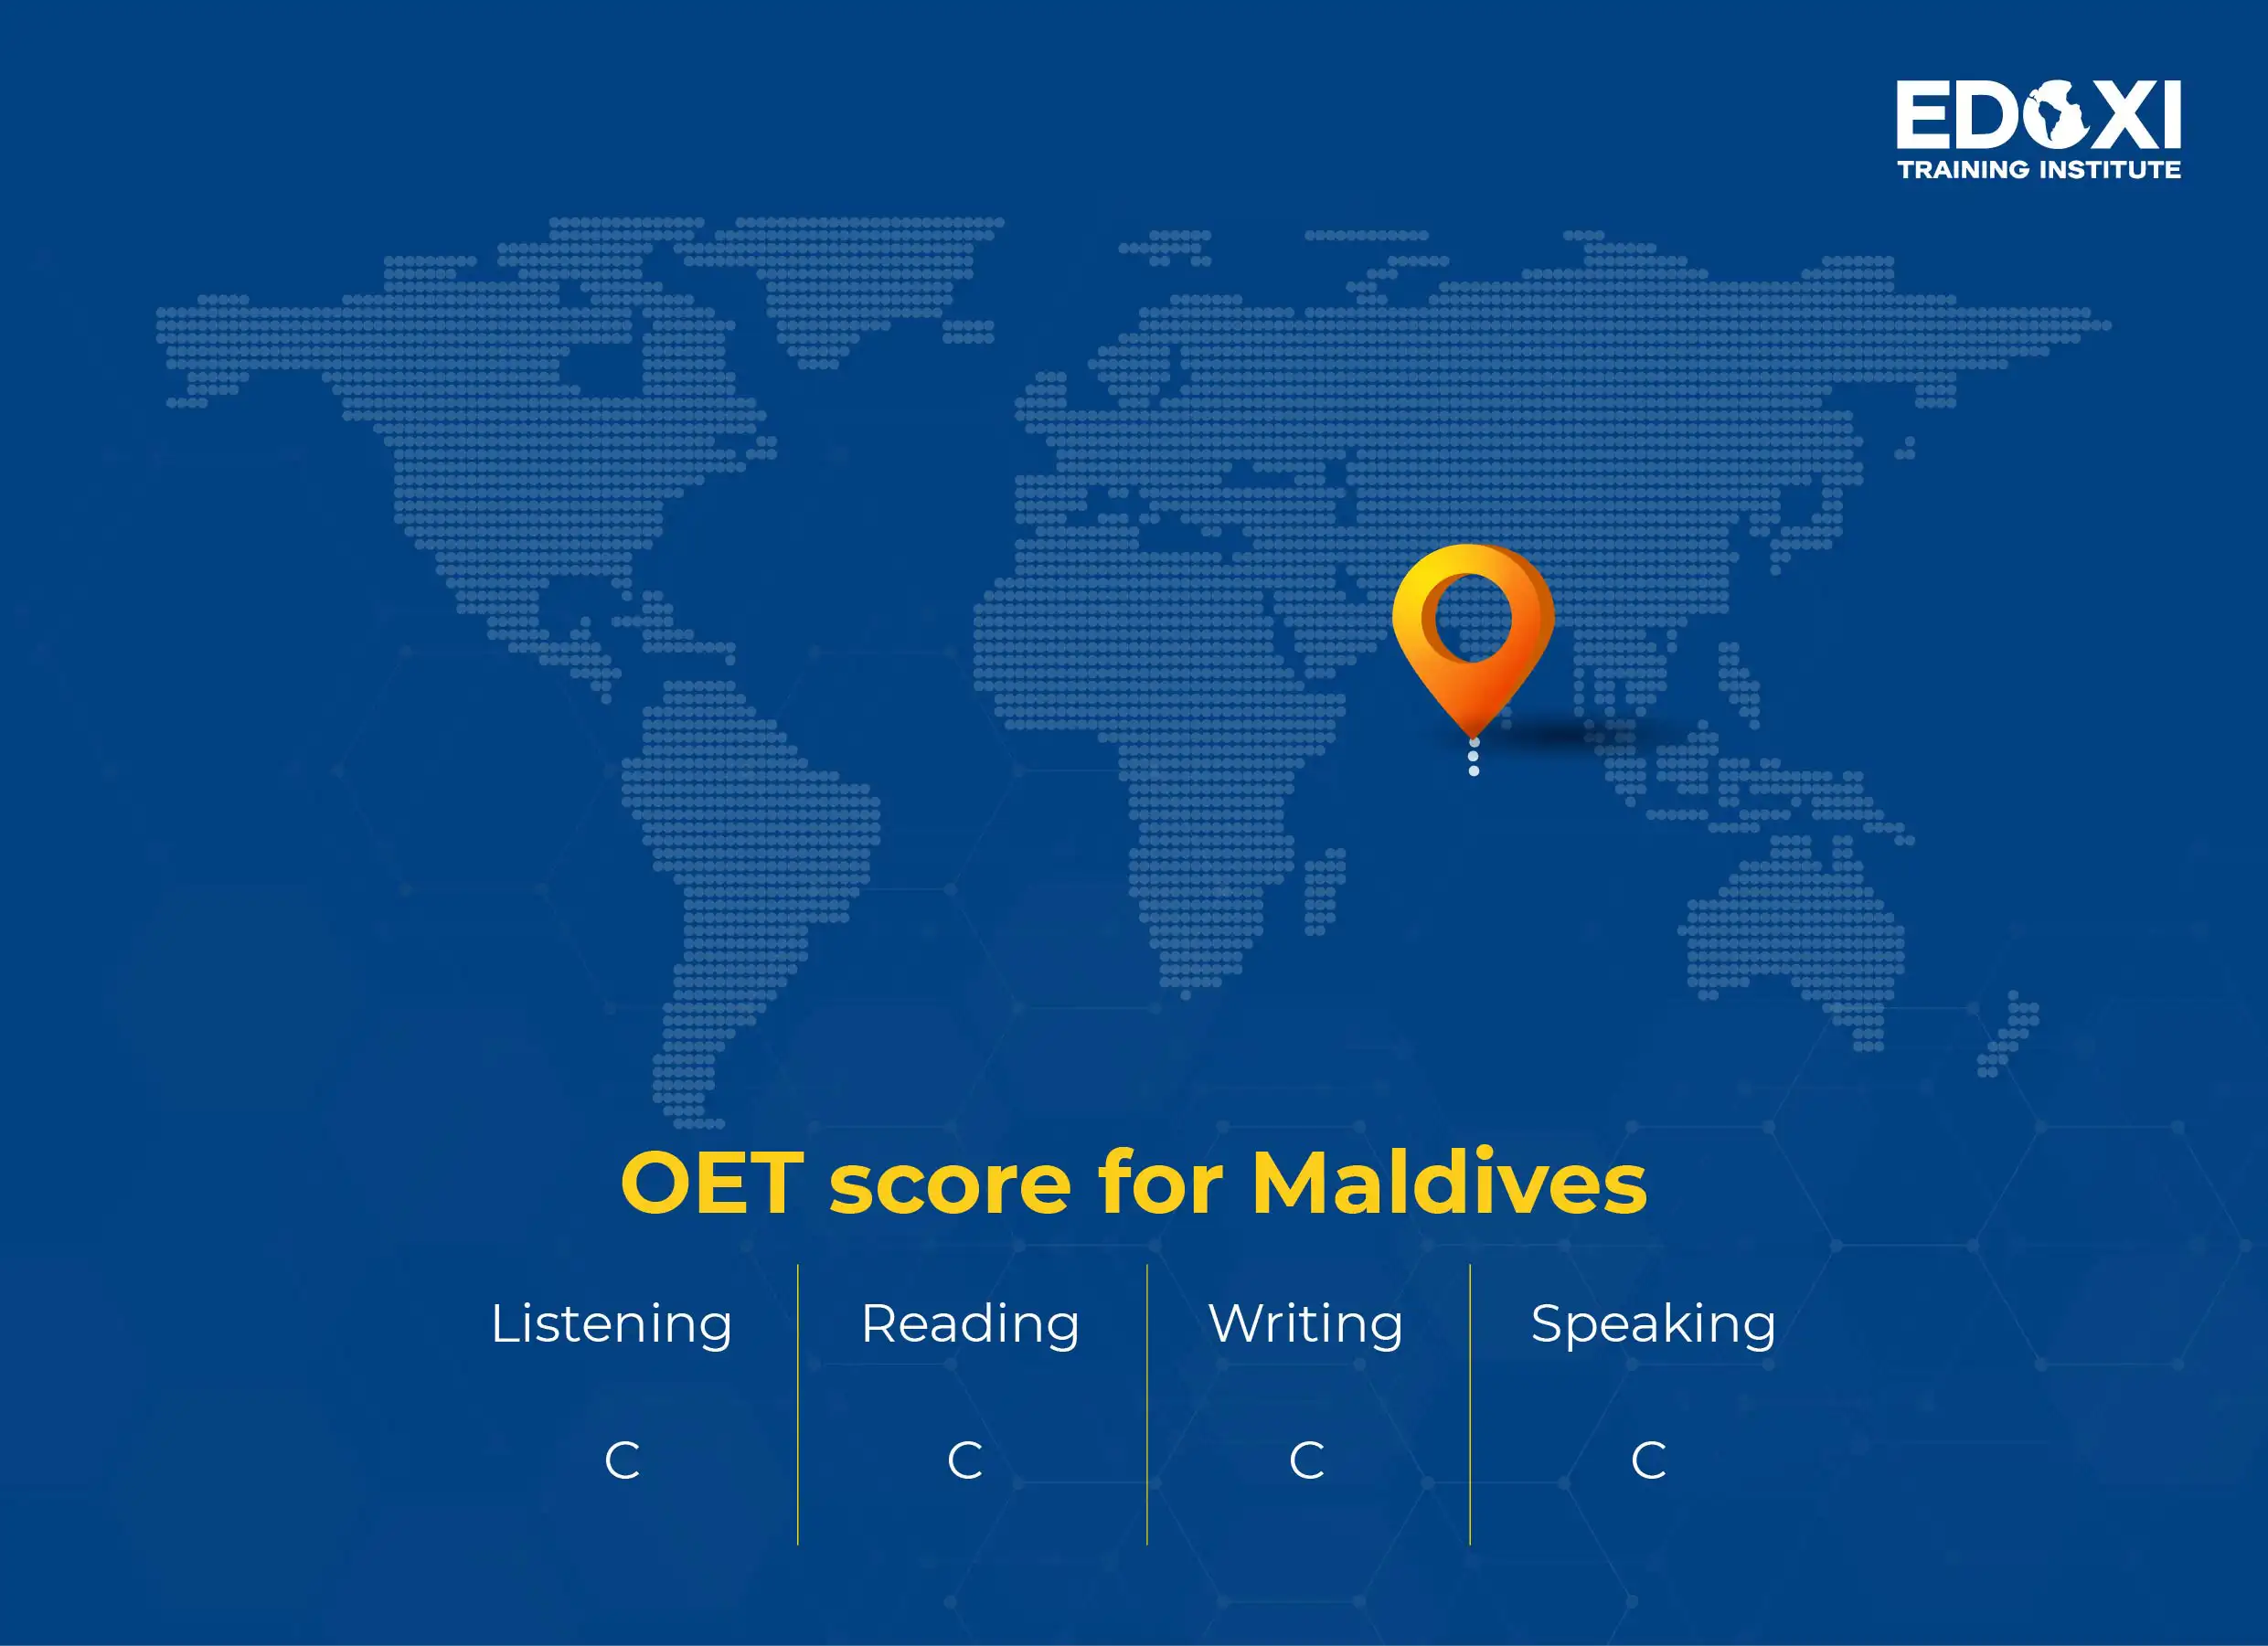 OET score required for the Maldives